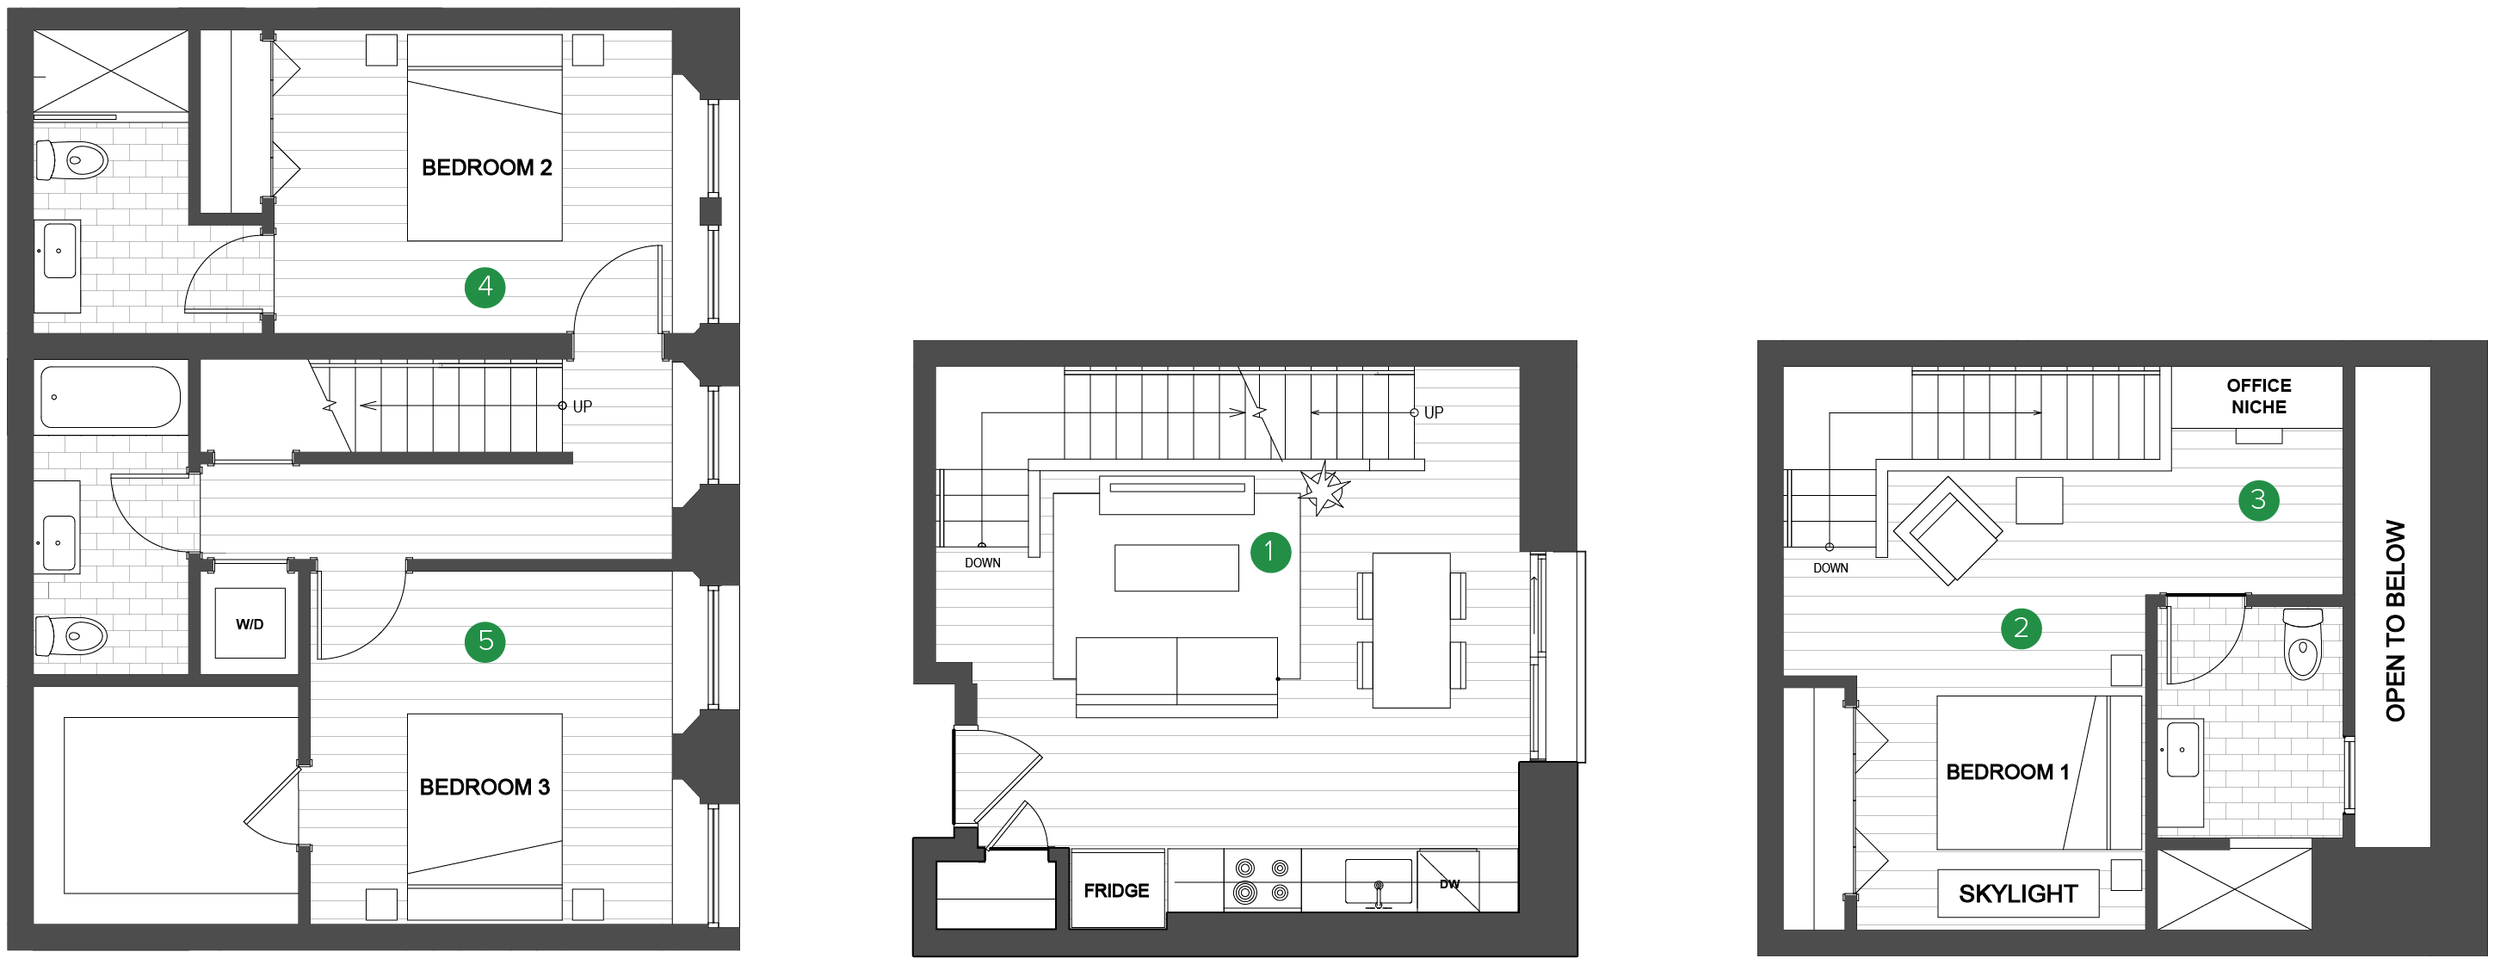   UNIT 03  3 BEDROOM / 3 BATH TRIPLEX +OFFICE NICHE 1534 SQUARE FEET   REQUEST INFORMATION / APPLY FOR THIS UNIT   